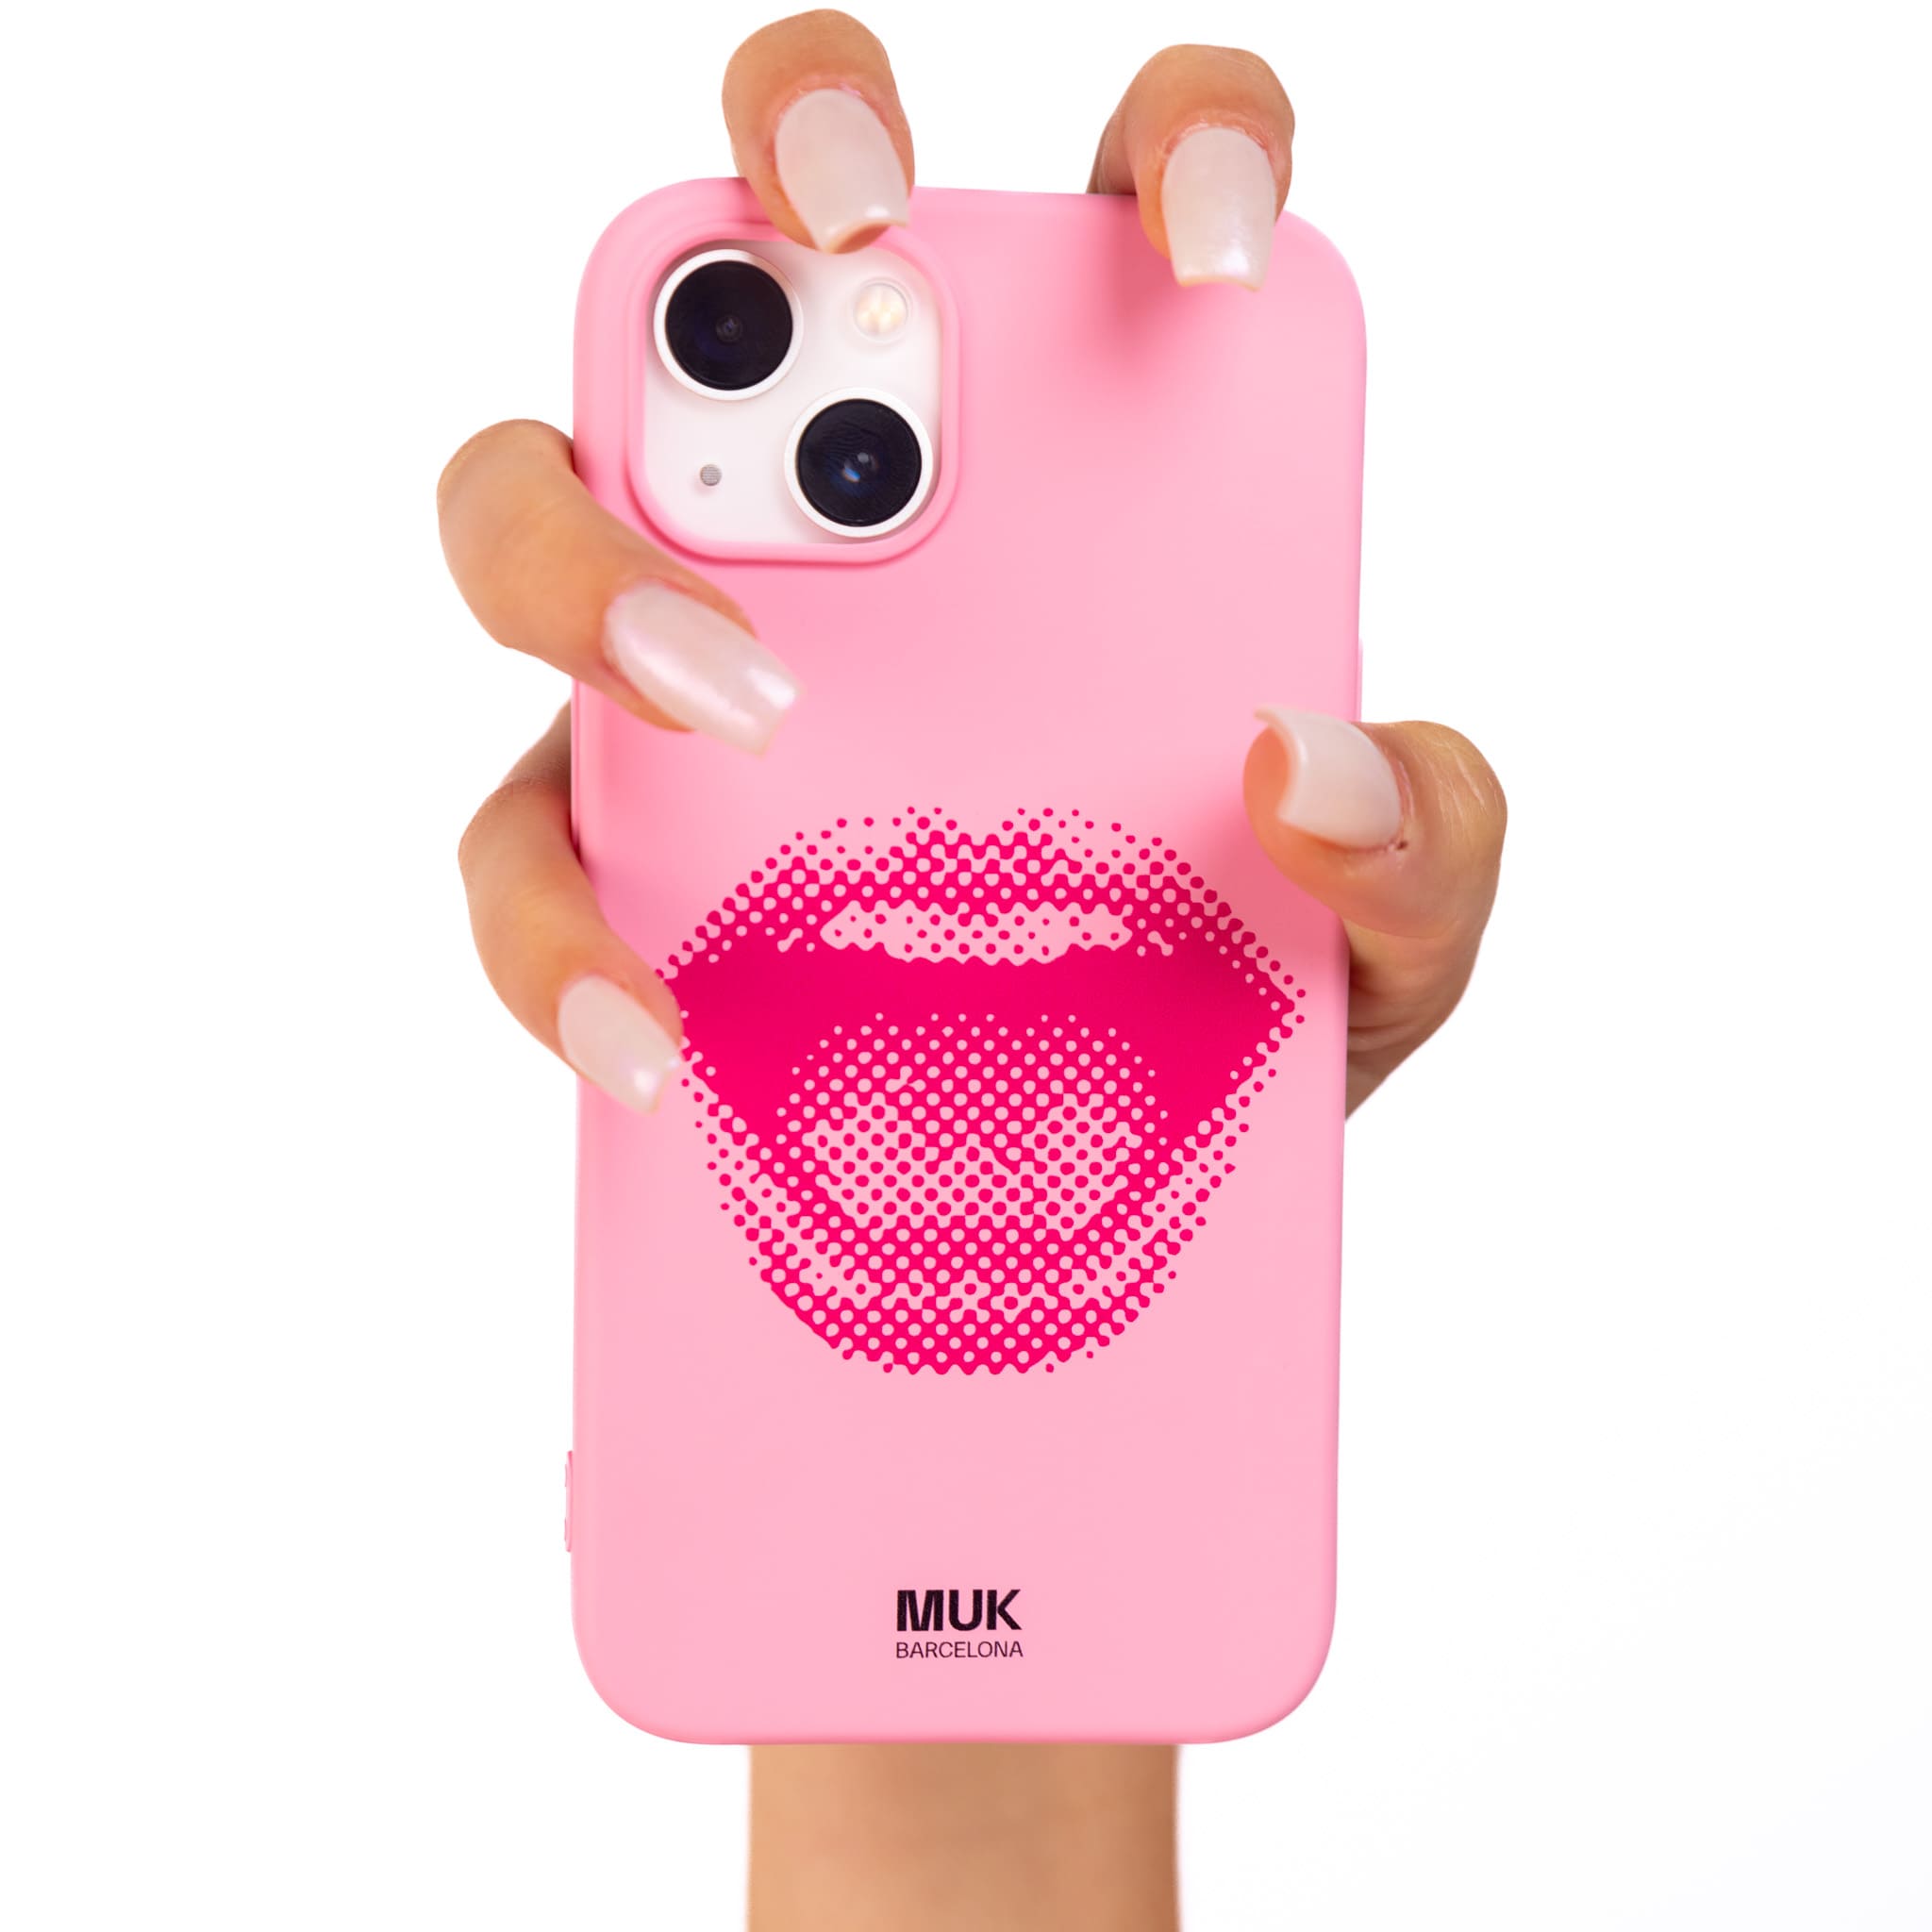 Pink TPU  case with lips design with pop art effect.
